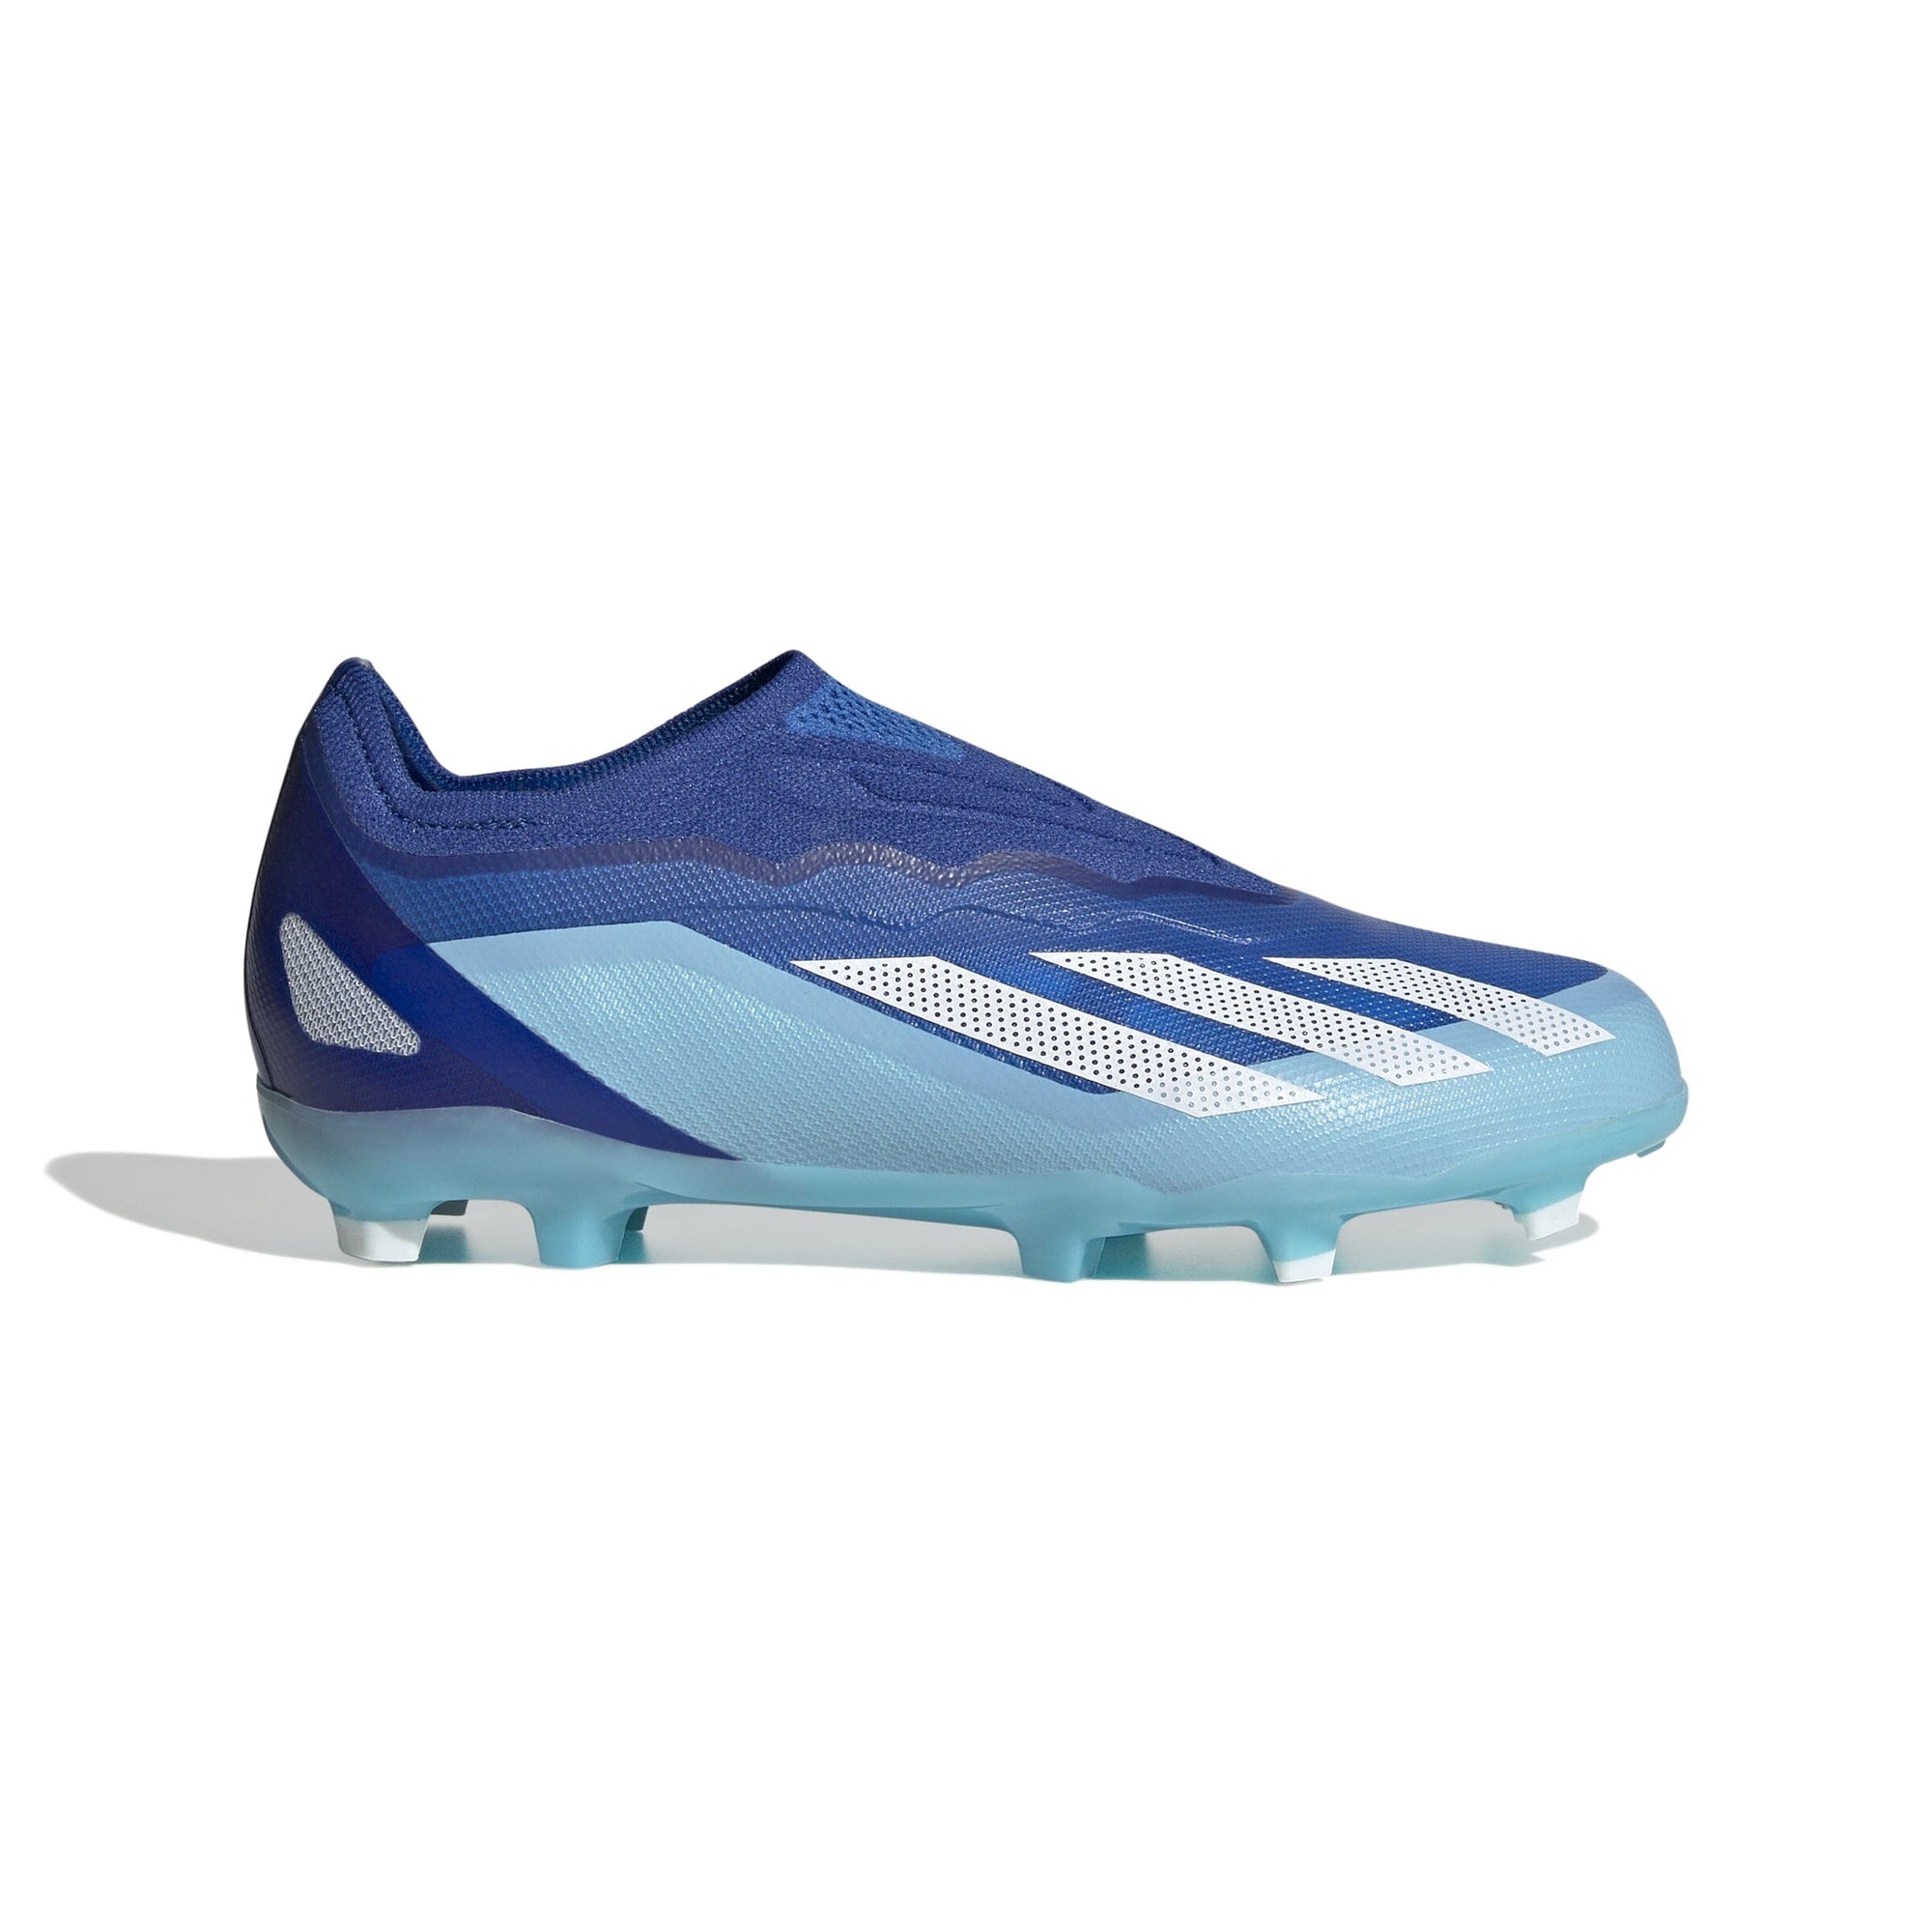 adidas Youth X Crazyfast.1 Ll Firm Ground | IE6643 Cleats Adidas 1 Bright Royal / FTWR White / Bliss Blue 